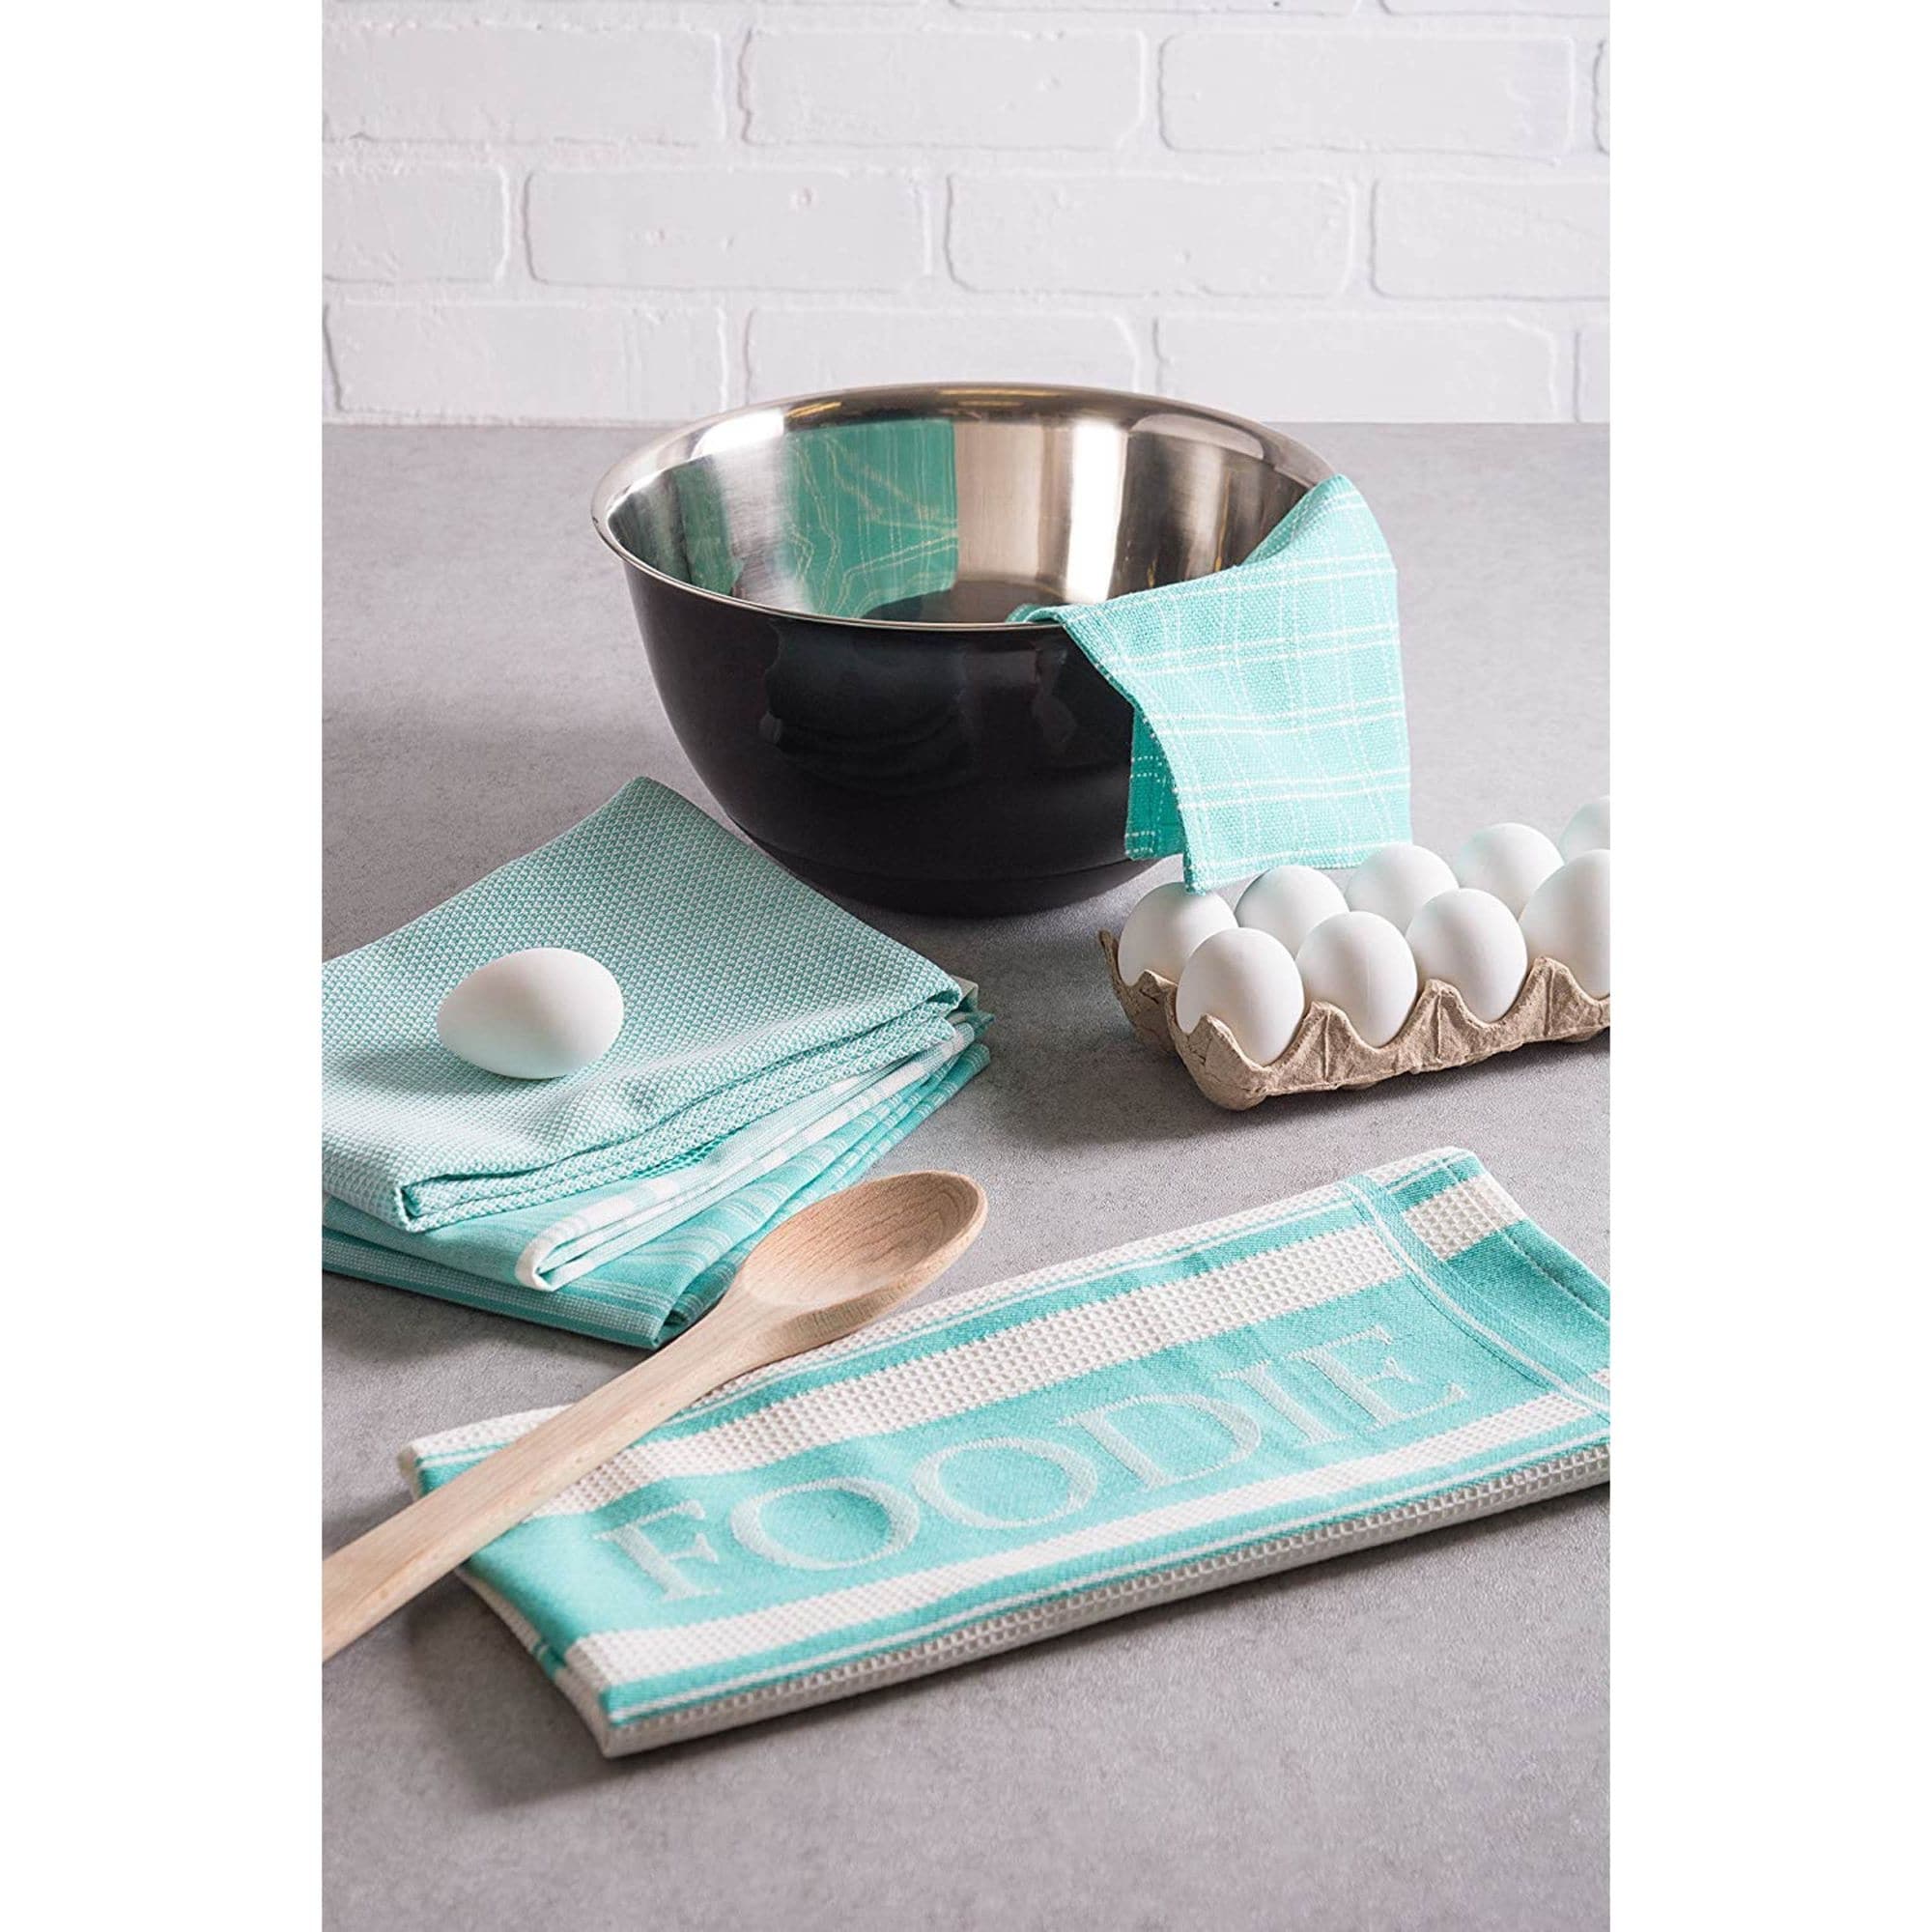 https://ak1.ostkcdn.com/images/products/is/images/direct/5d05d7dc7a8b0b92ffd2571de46bf8e46efa162a/Set-of-5-Teal-Dish-Cloths-and-Dish-Towels-28%22-x-18%22.jpg